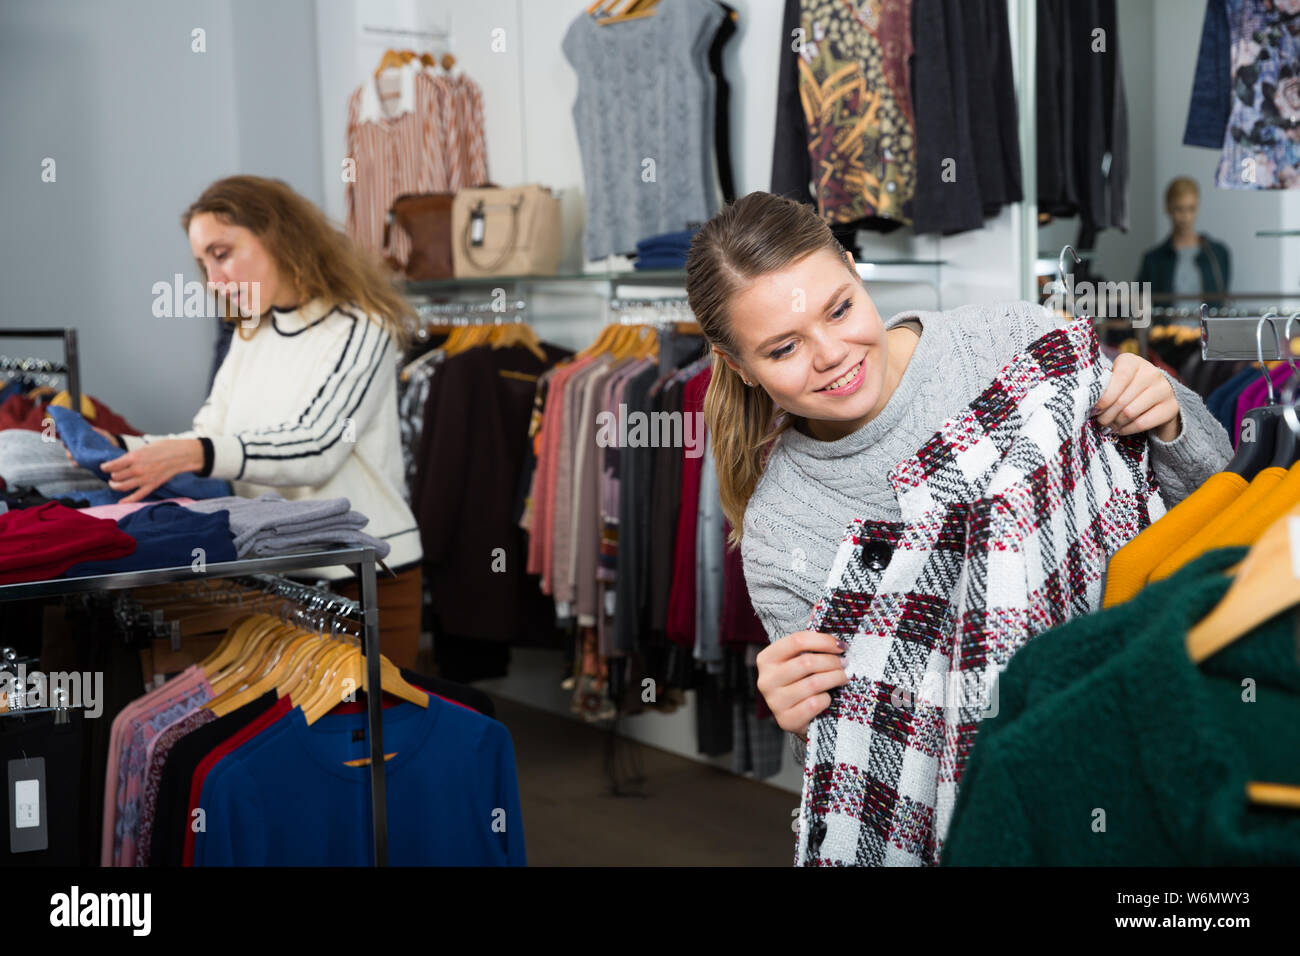 Shopping room of clothing shop with women choosing overcoats and cardigans Stock Photo